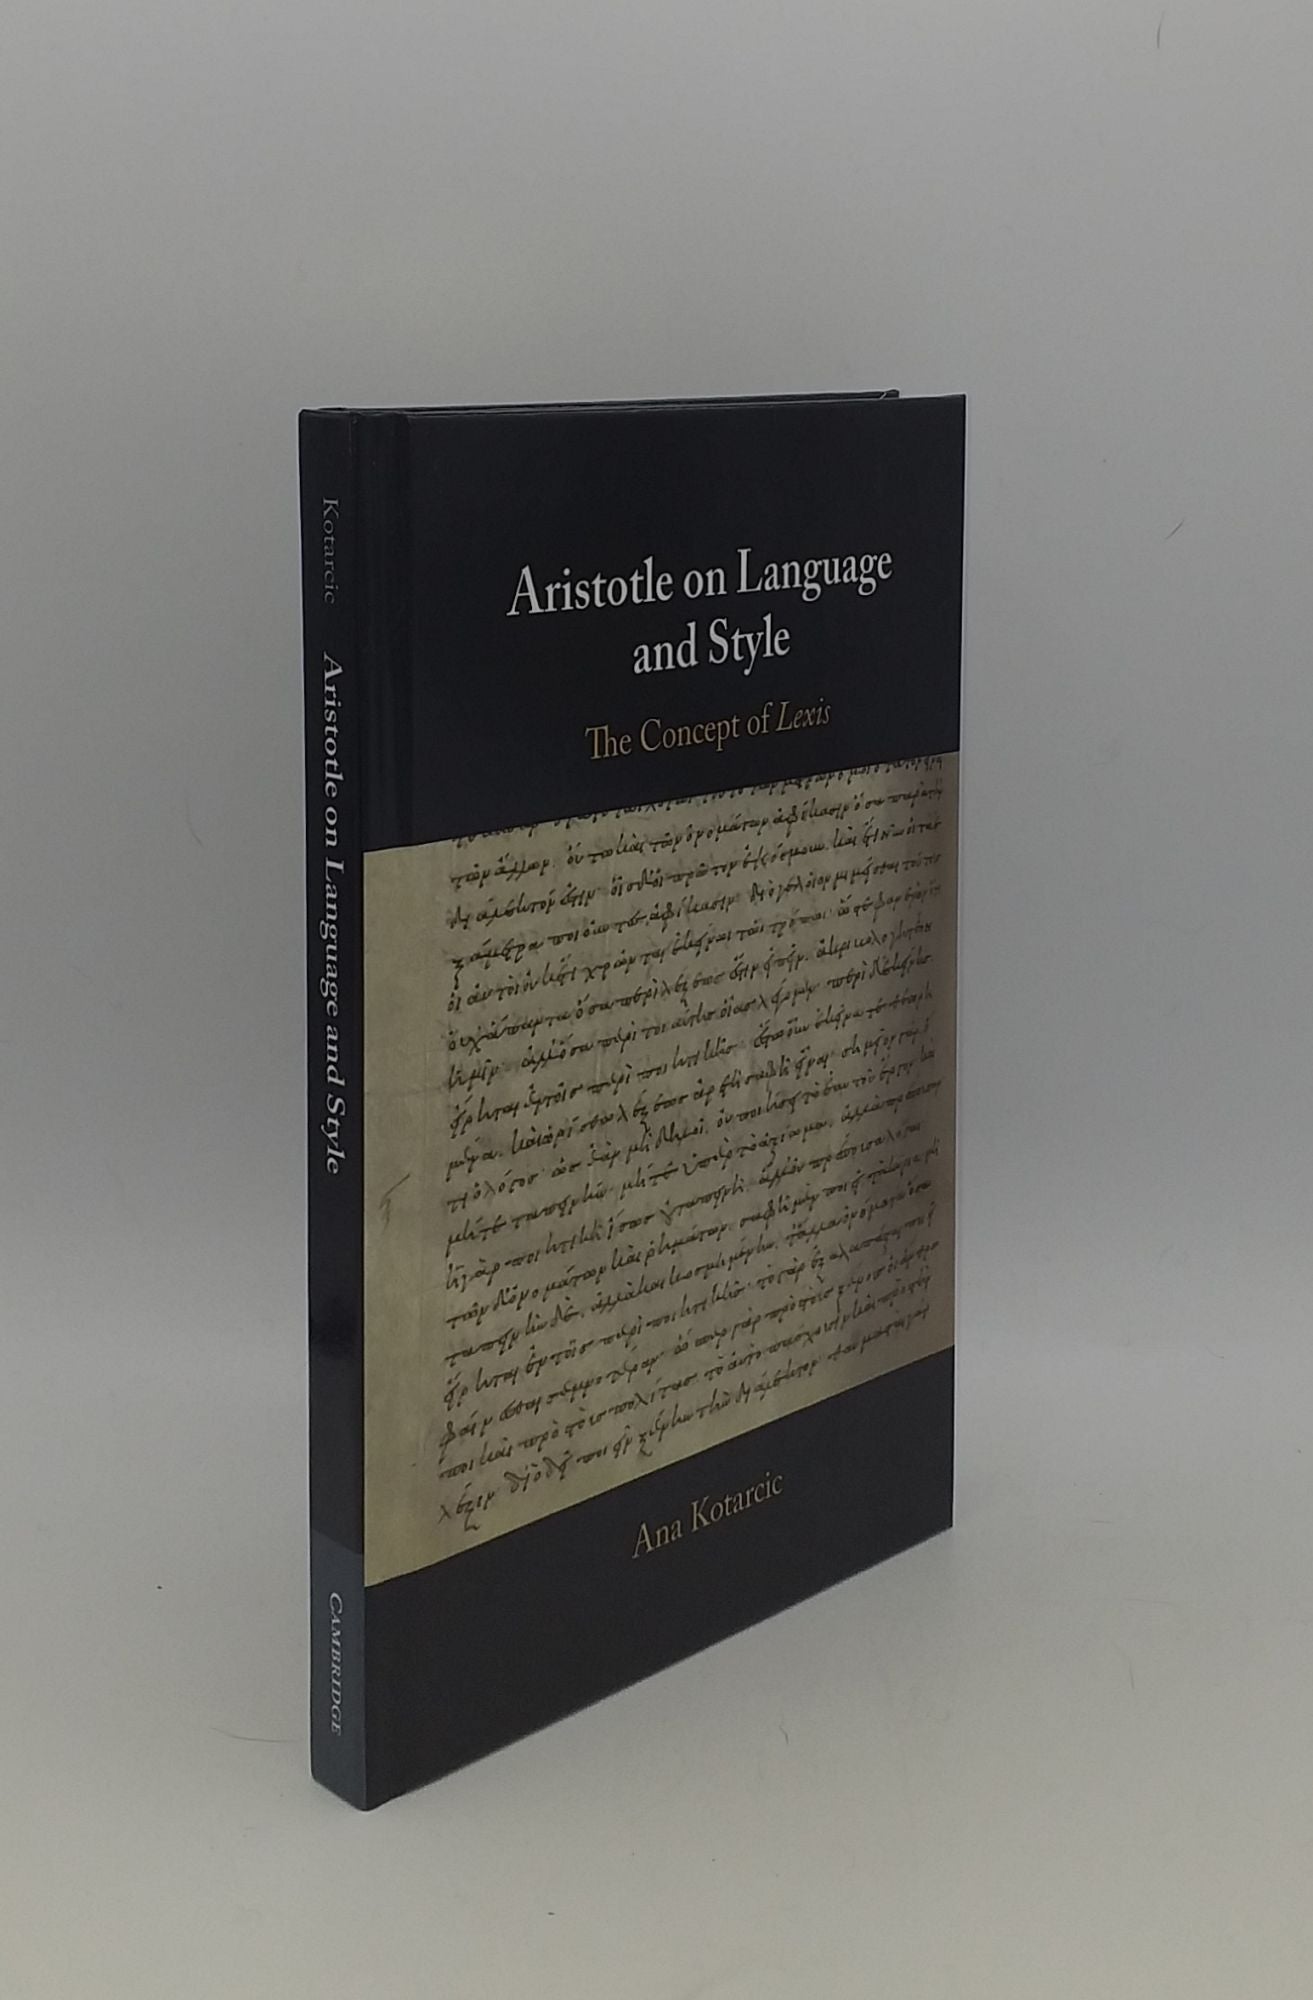 KOTARCIC Ana - Aristotle on Language and Style the Concept of Lexis